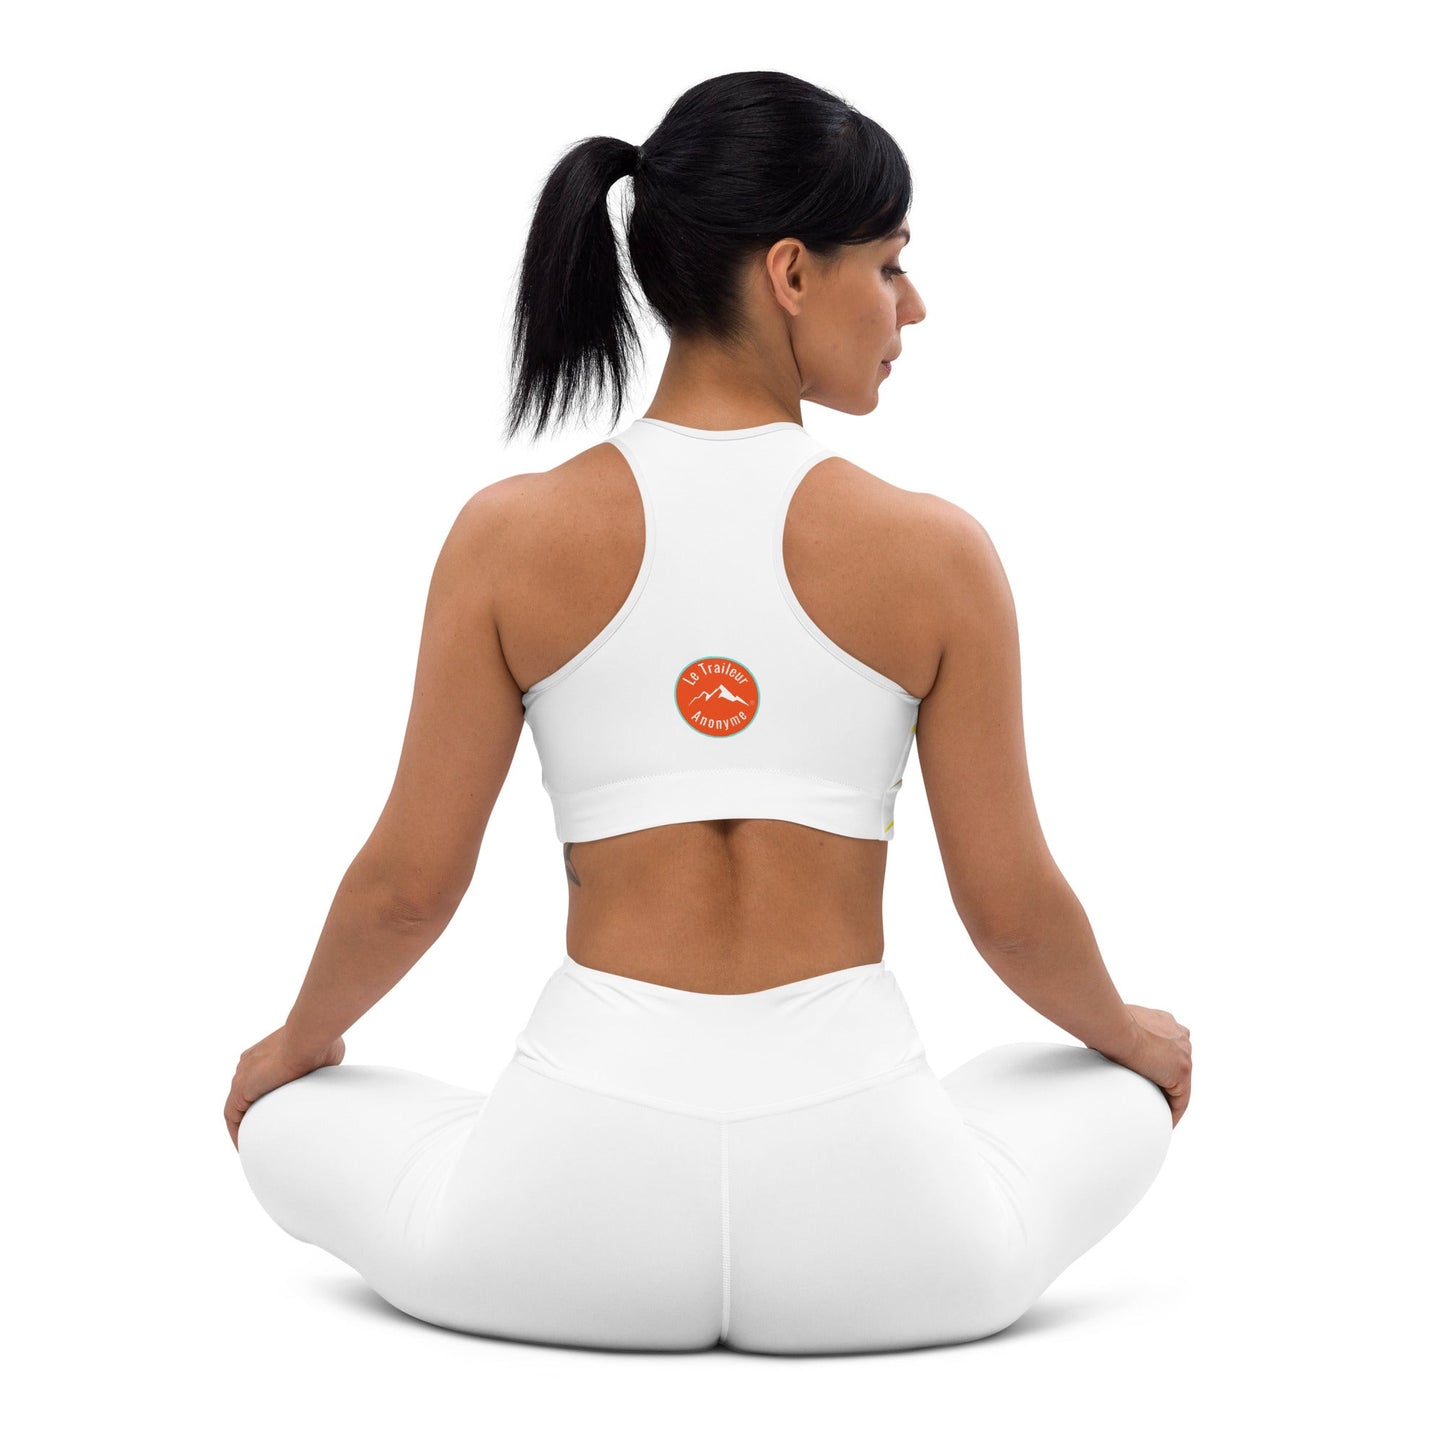 Brassière Running/Yoga - Collection Graphix - Le Traileur Anonyme